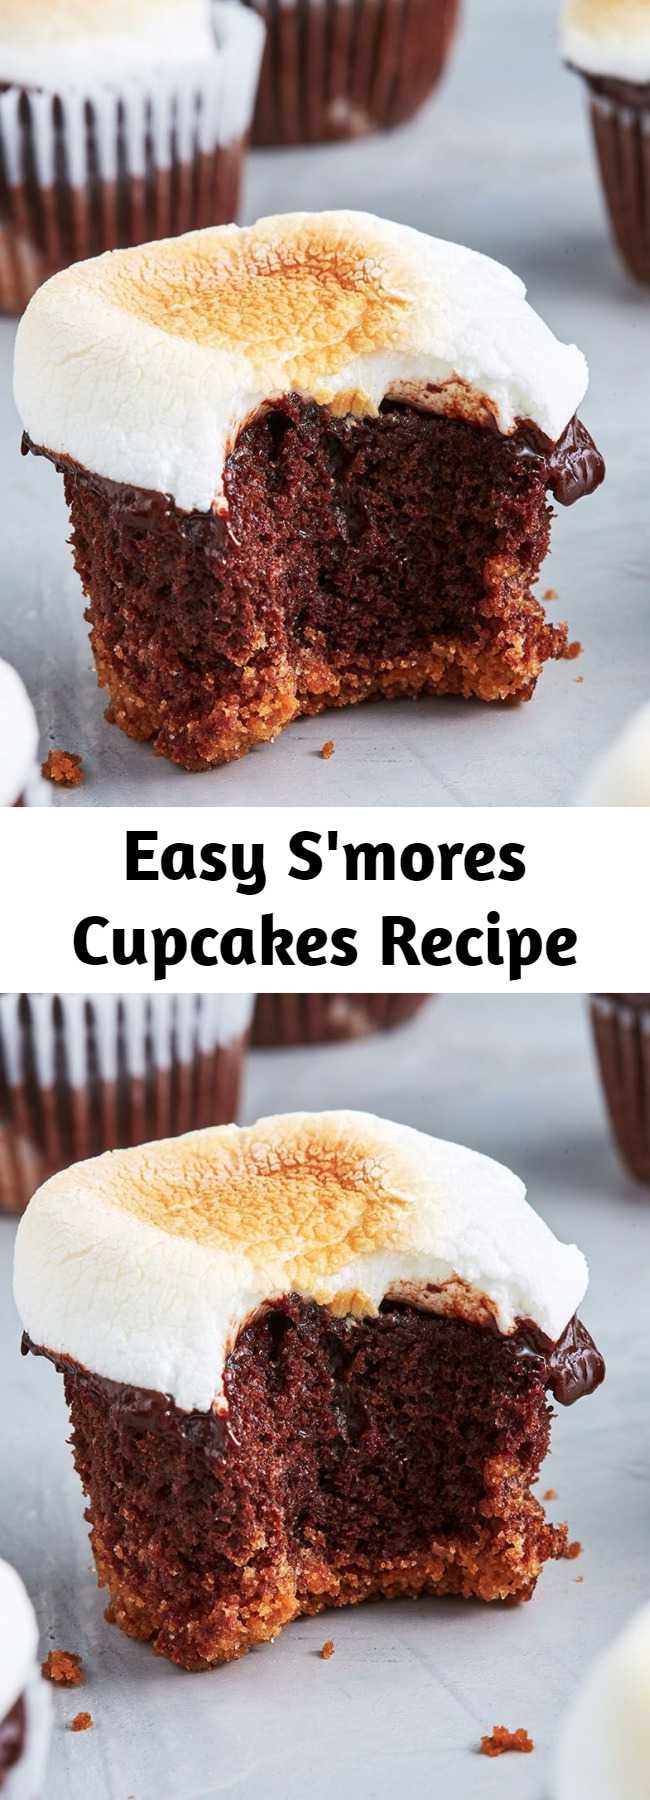 Easy S'mores Cupcakes Recipe - This S’mores Cupcakes recipe will leave you wanting s'more and s'more. S'mores are the best. There's no denying it. And now you can have everything you love about s'mores - buttery graham crackers, melty chocolate, and toasted marshmallow - in a cupcake! It's the best of both worlds!!